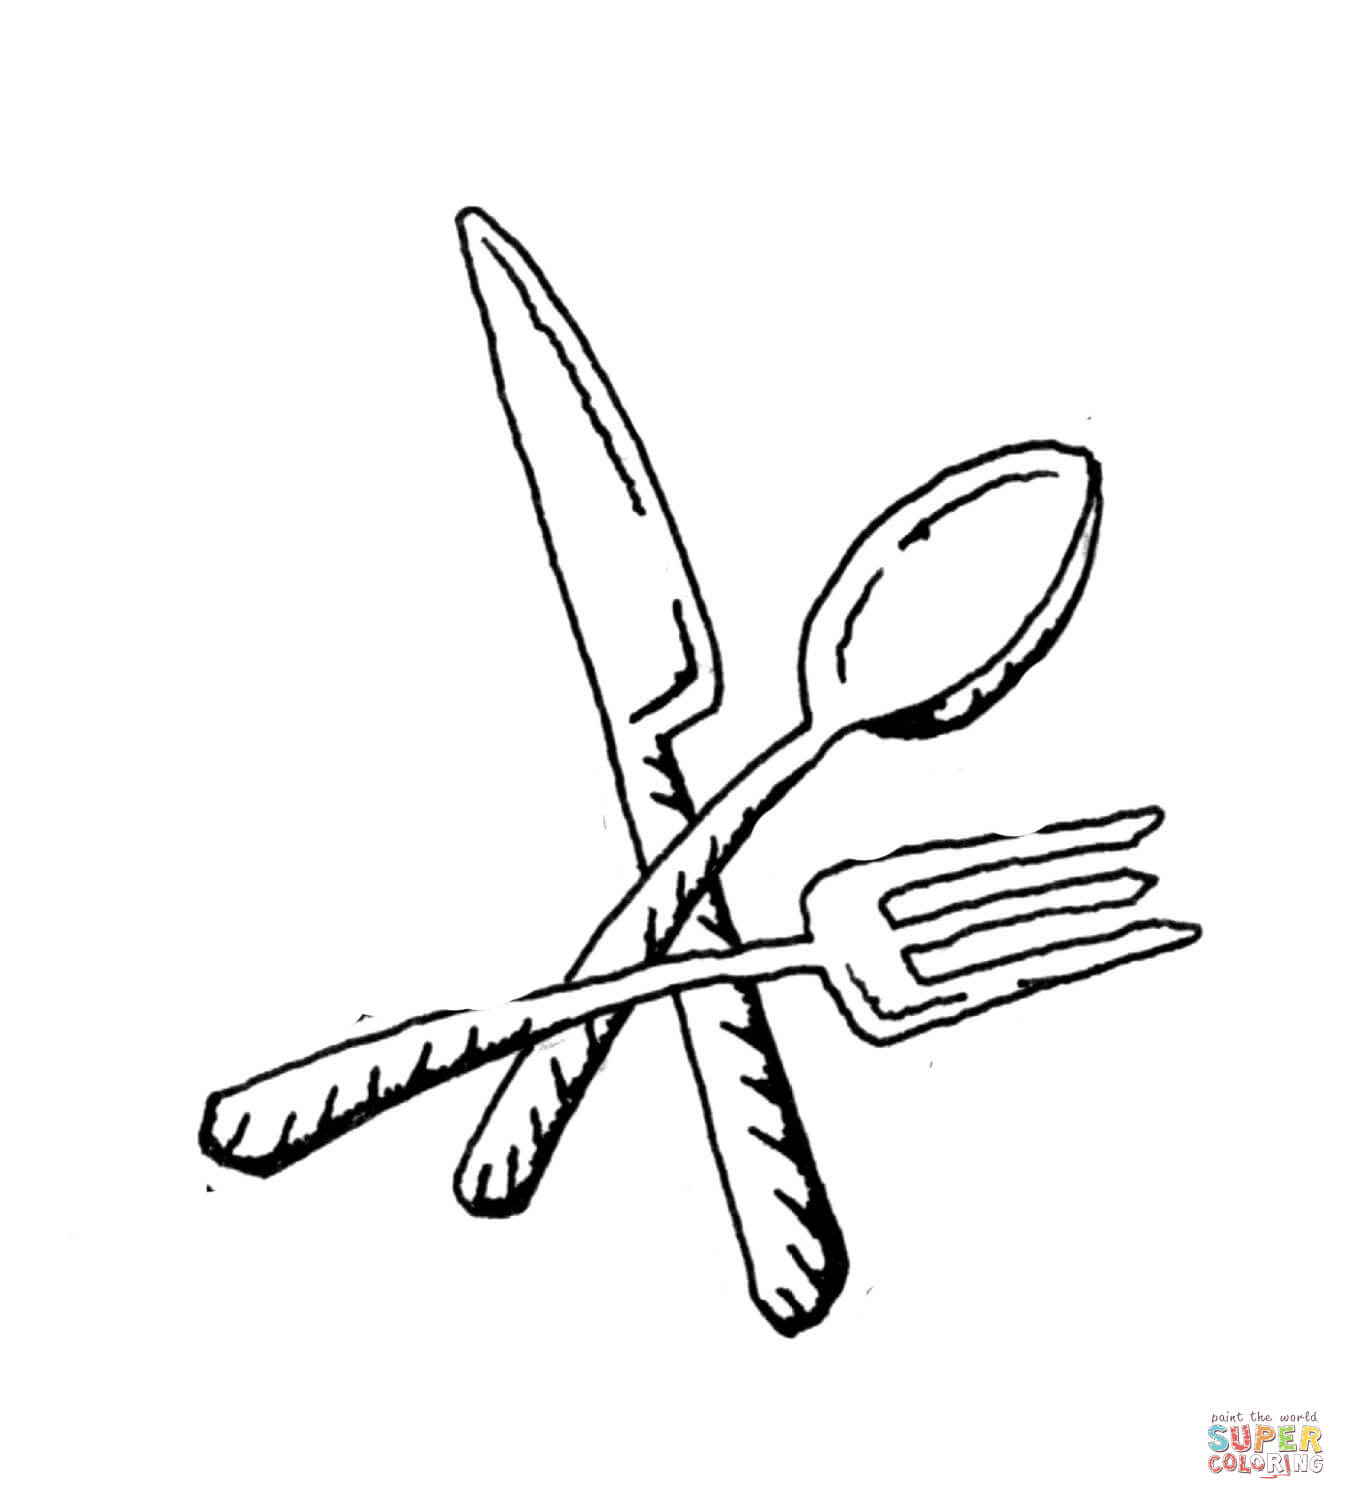 Fork Spoon And Knife coloring page | Free Printable Coloring Pages